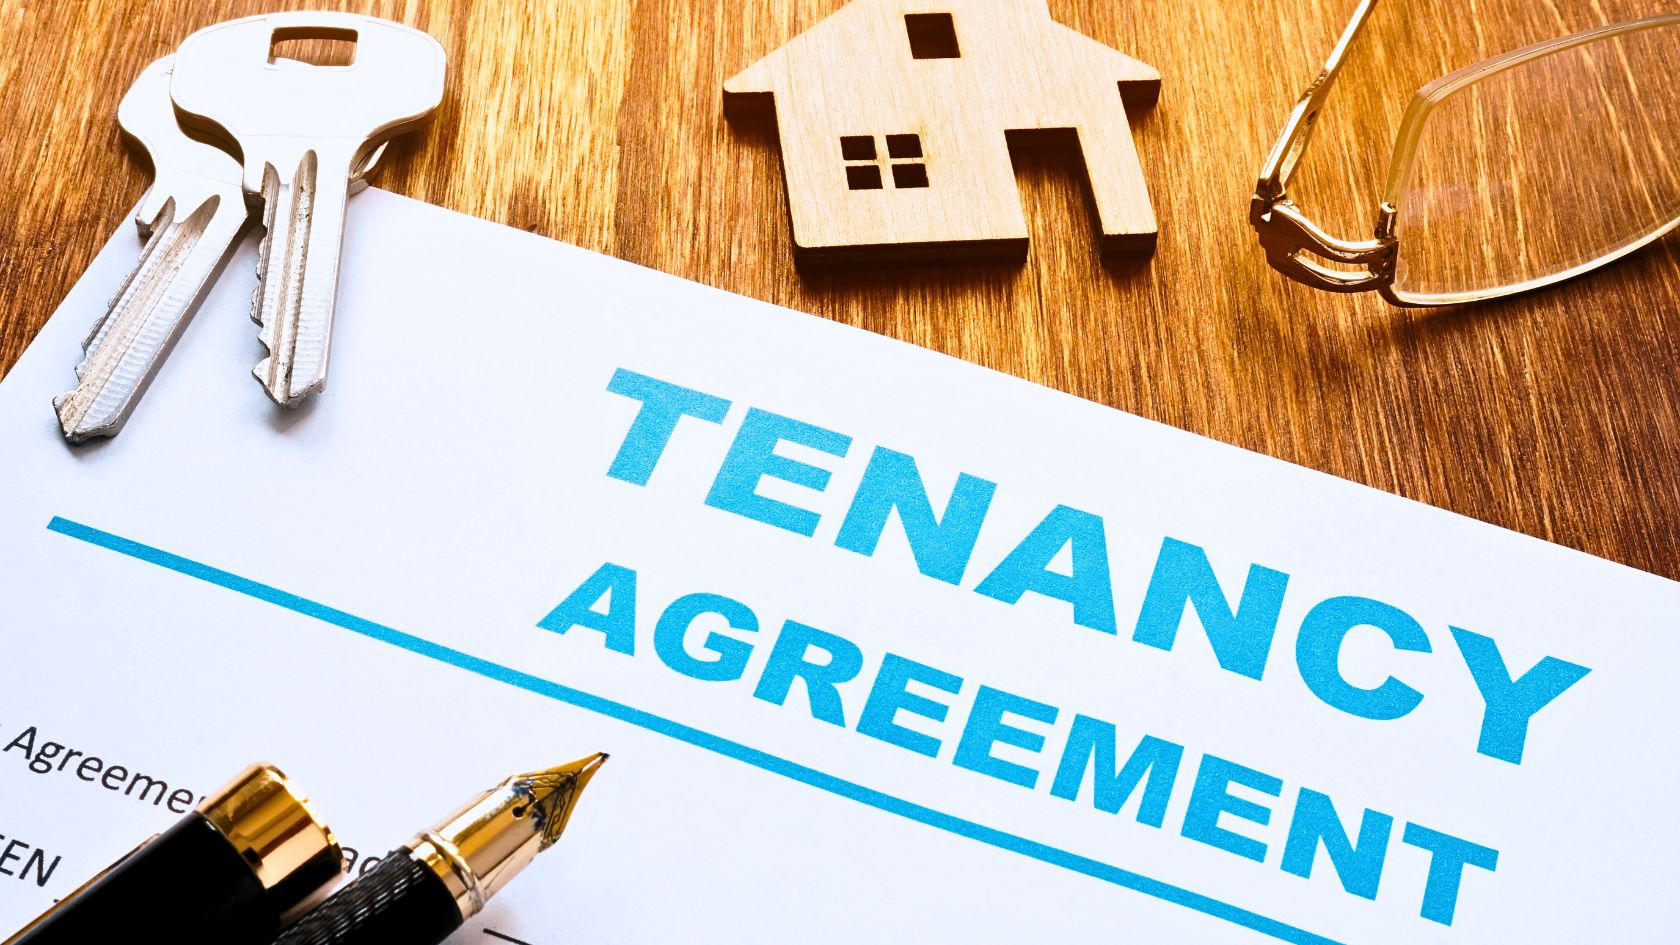 Basic facts about obligations & rights of tenants in South Africa